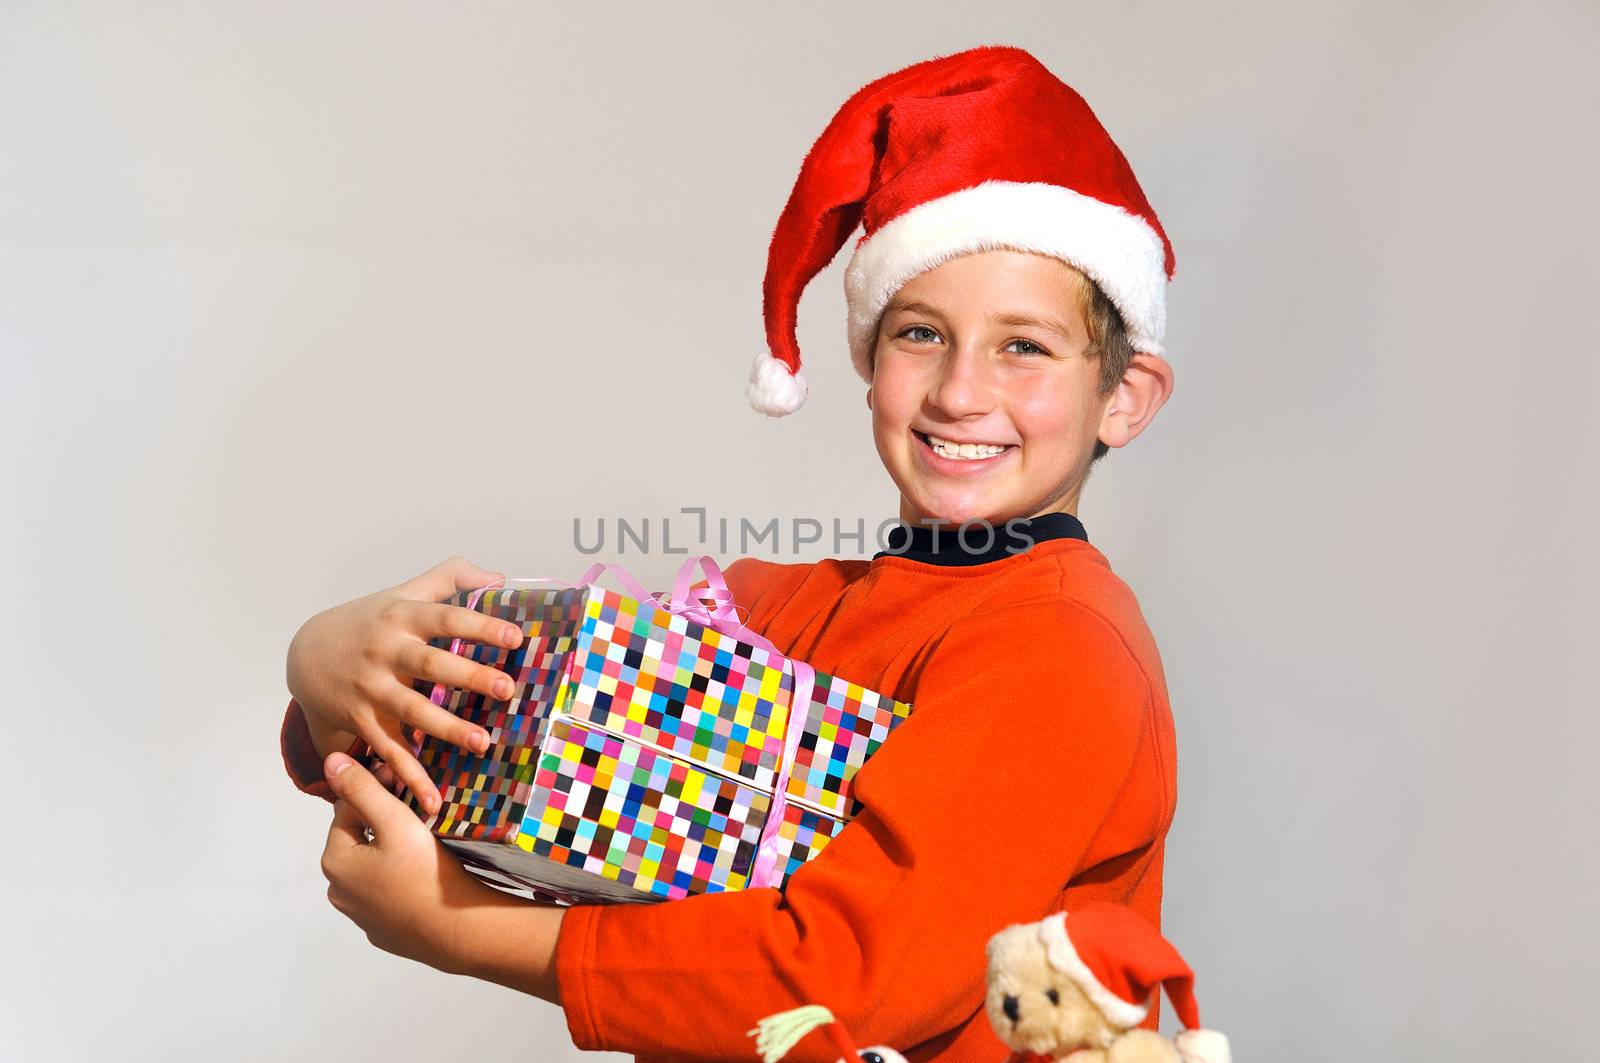 
a smiling boy in a red cap, holding a box with a gift 